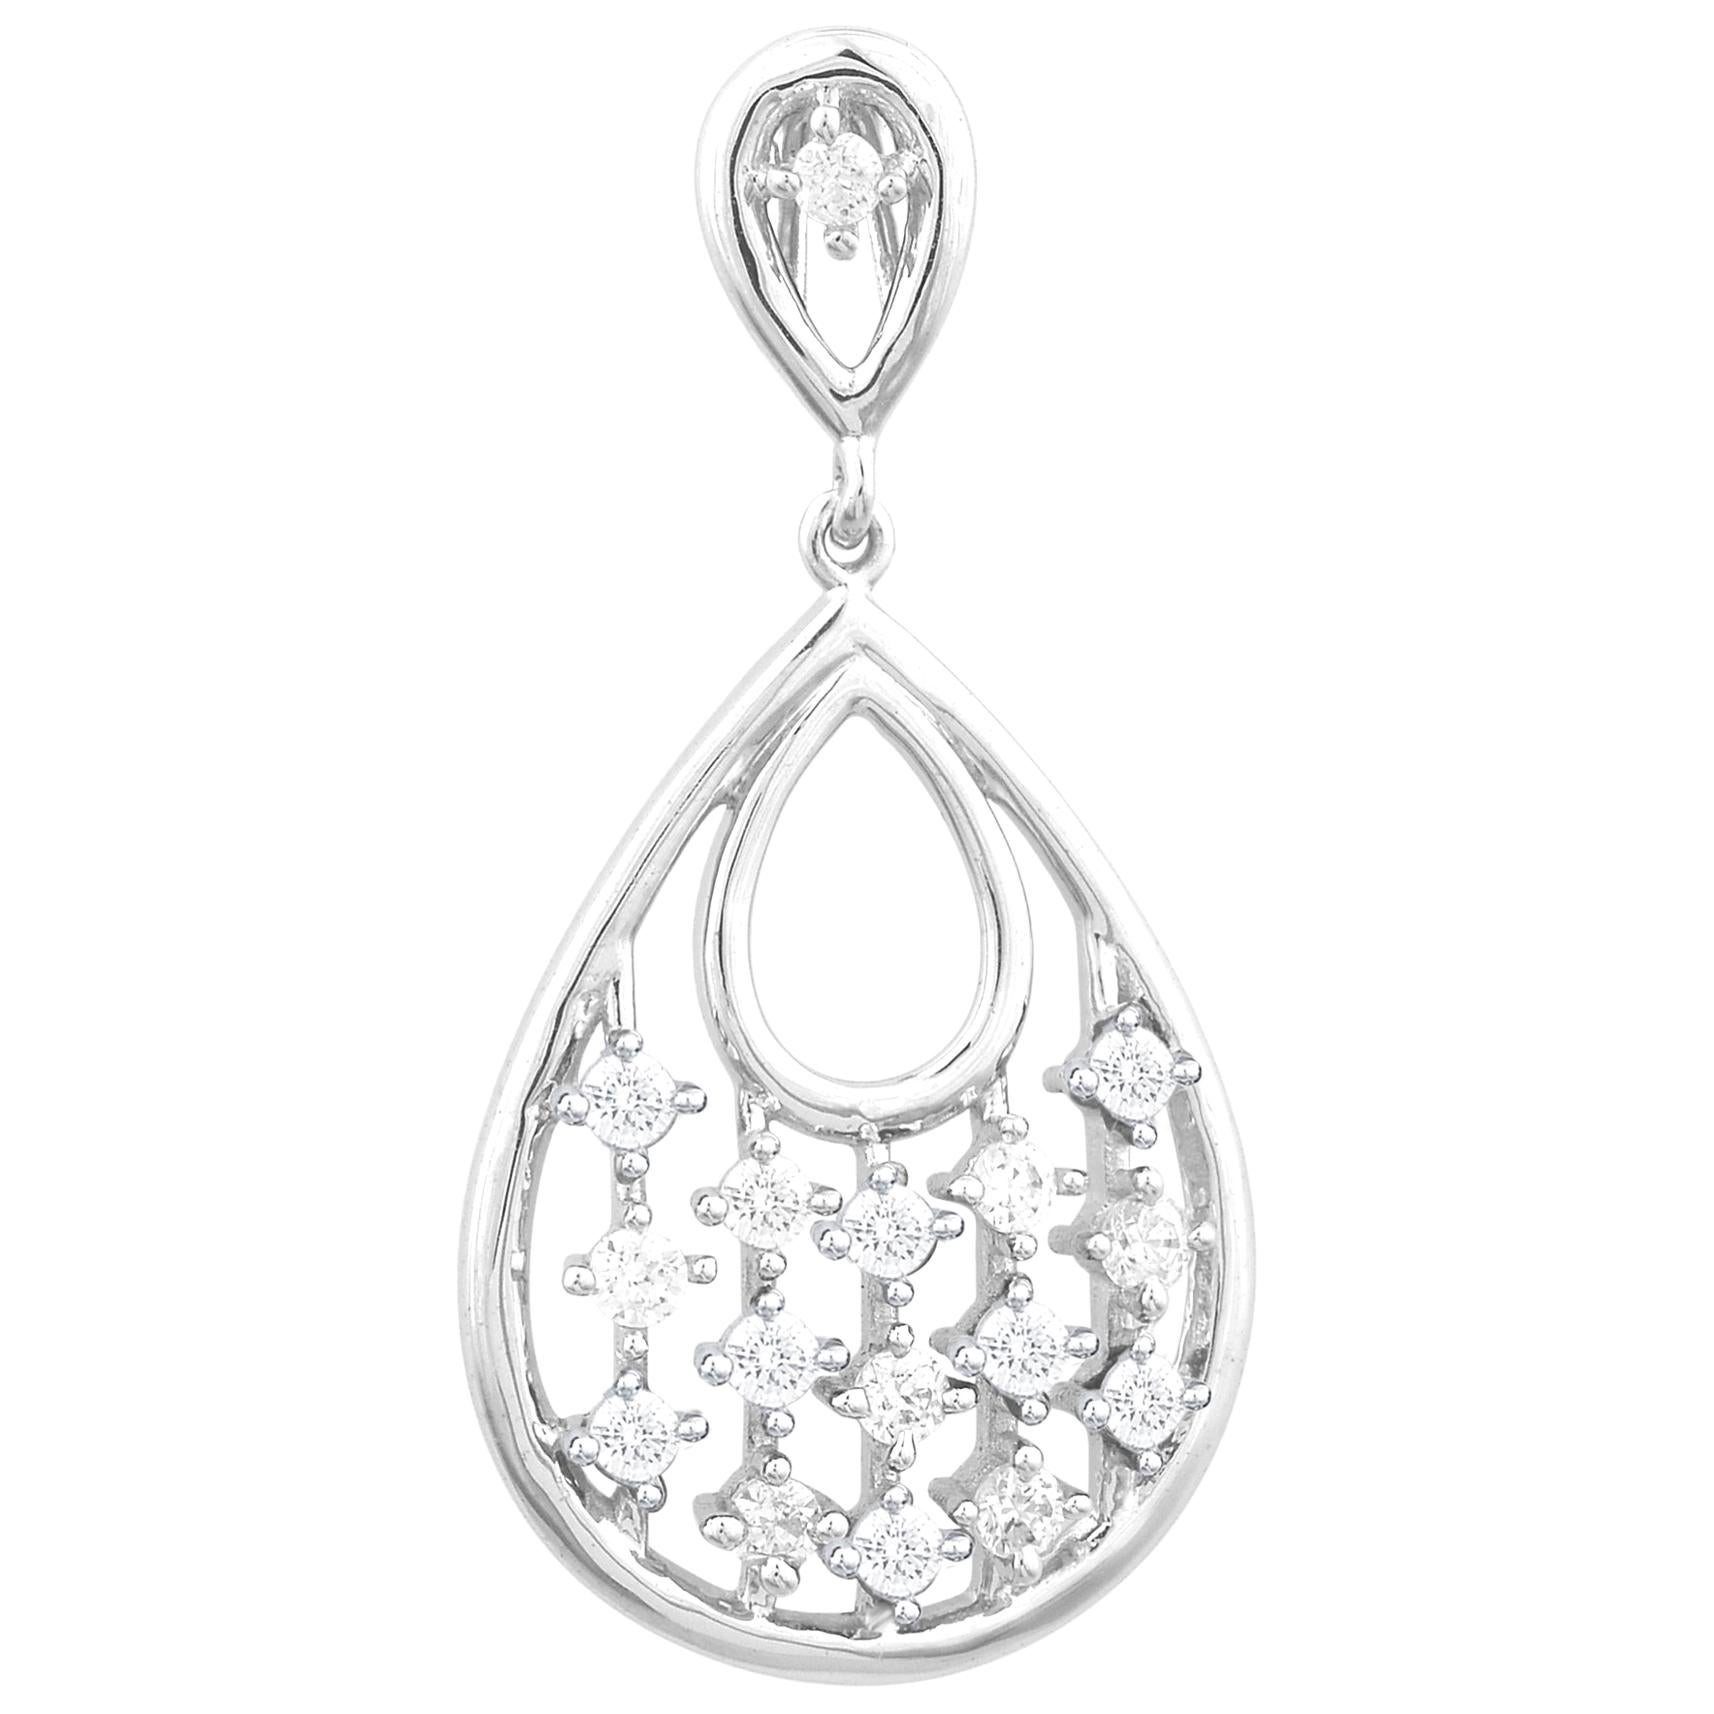 An easy and elegant addition to any attire, this sparkling diamond pear shaped pendant creates a style statement. Accentuated with 16 round diamonds set in prong setting and crafted by skillful craftsmen in 14 karat white gold. The total diamond